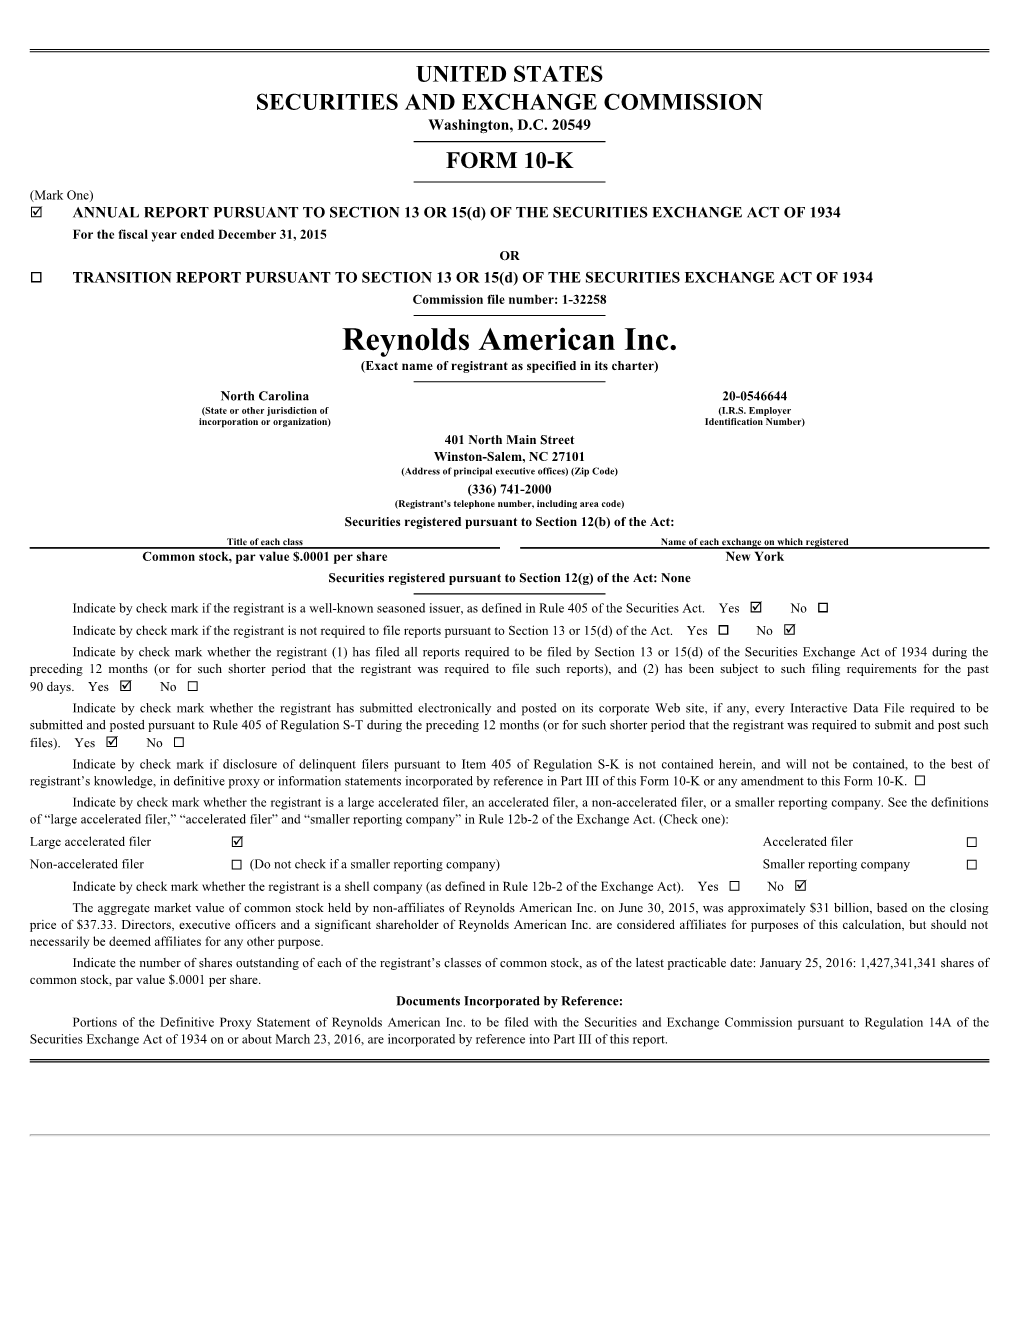 Reynolds American Inc. (Exact Name of Registrant As Specified in Its Charter)